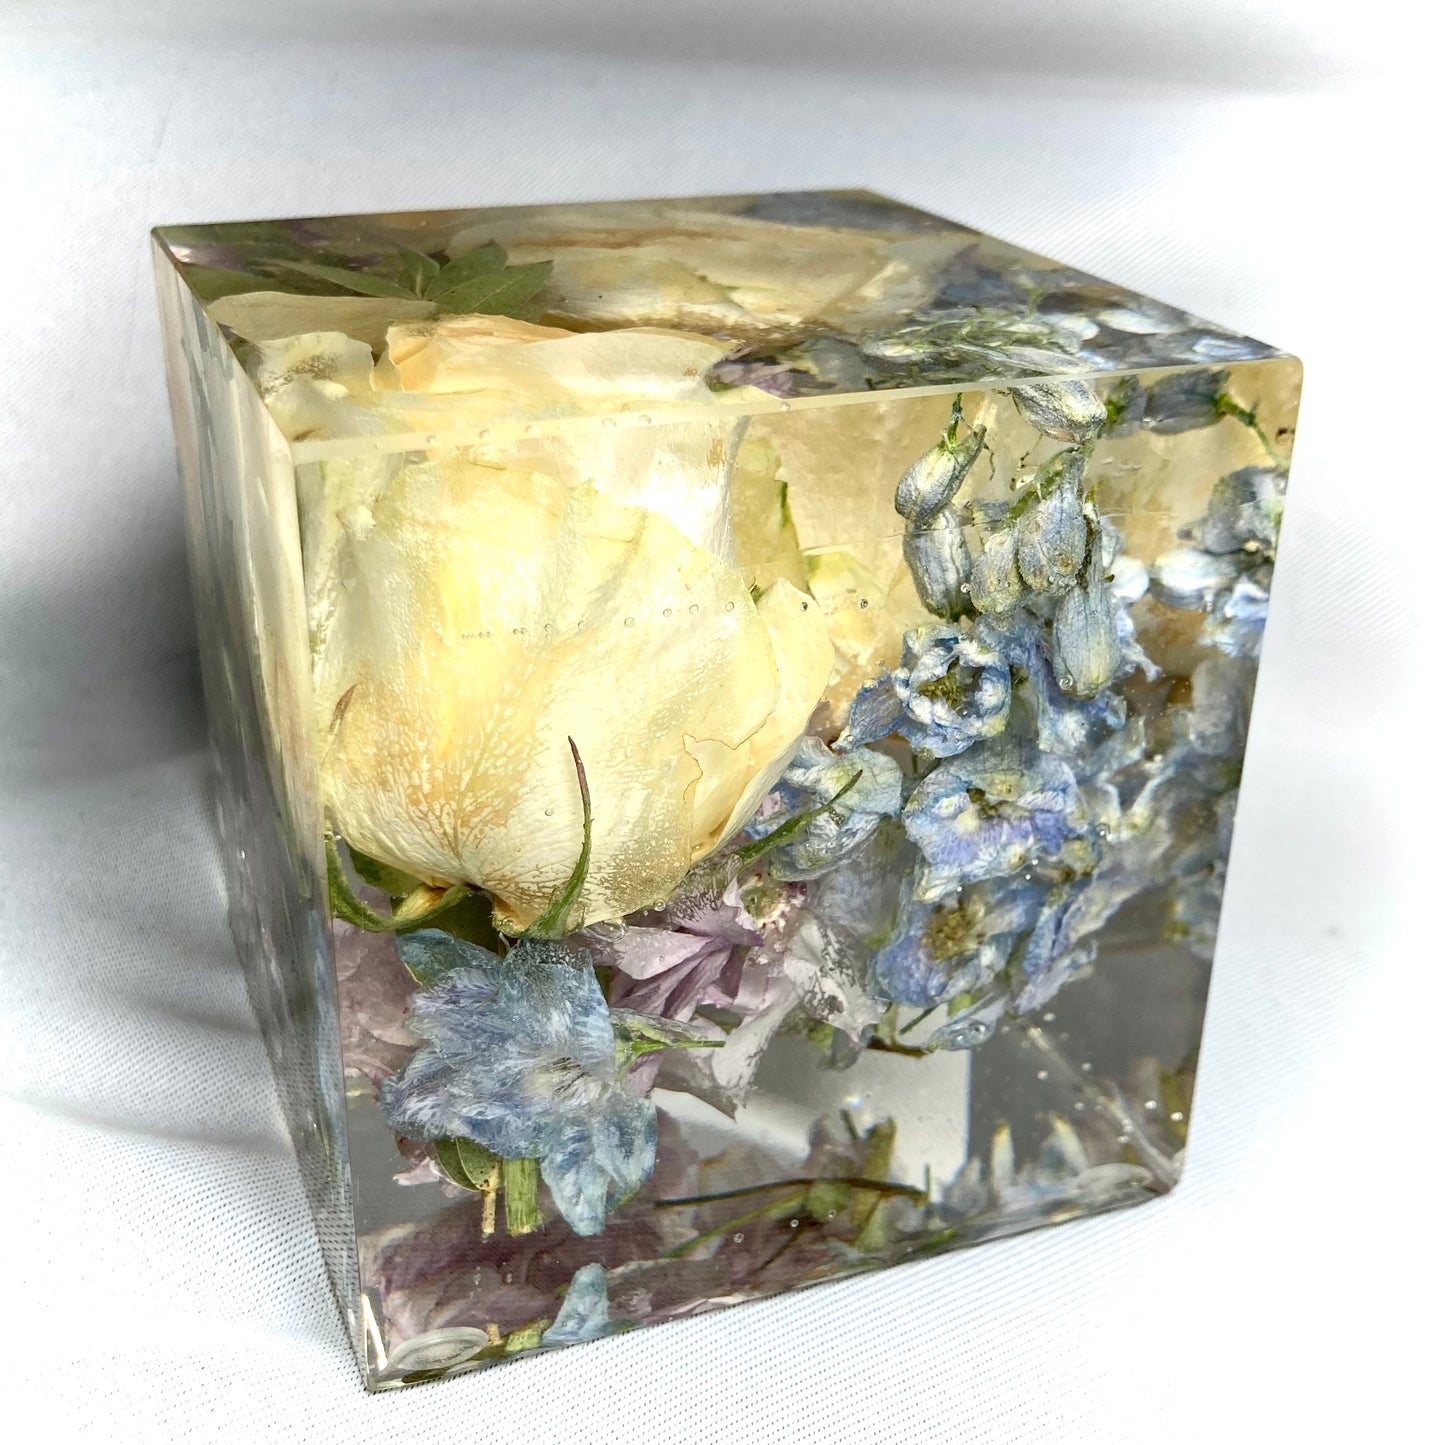 8cm cube containing two small peach roses, pale blue delphinium pink blossom